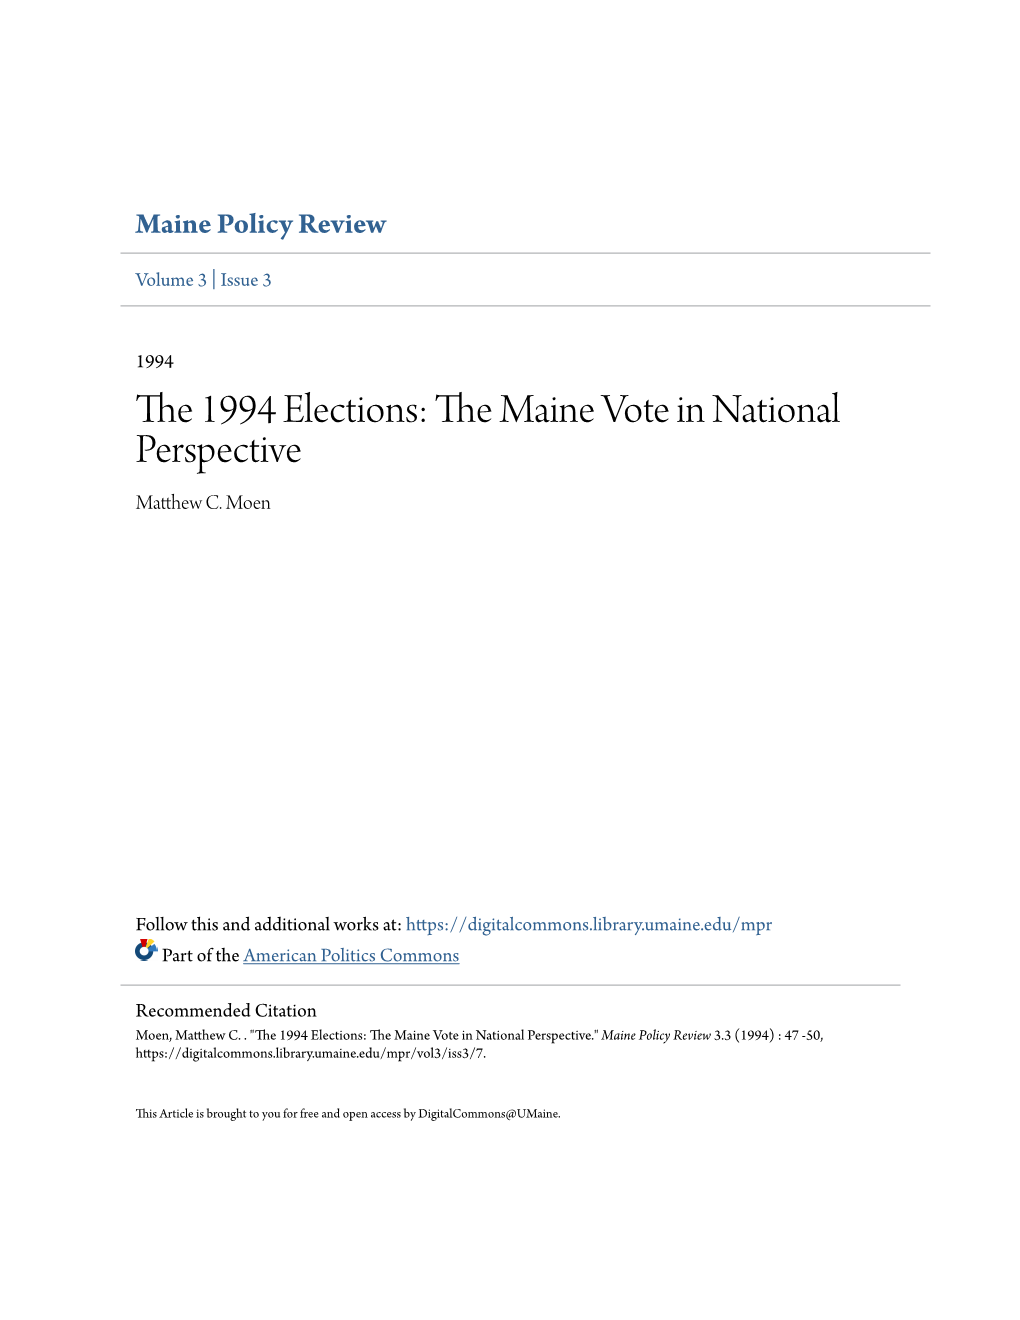 The 1994 Elections: the Ainem Vote in National Perspective." Maine Policy Review 3.3 (1994) : 47 -50